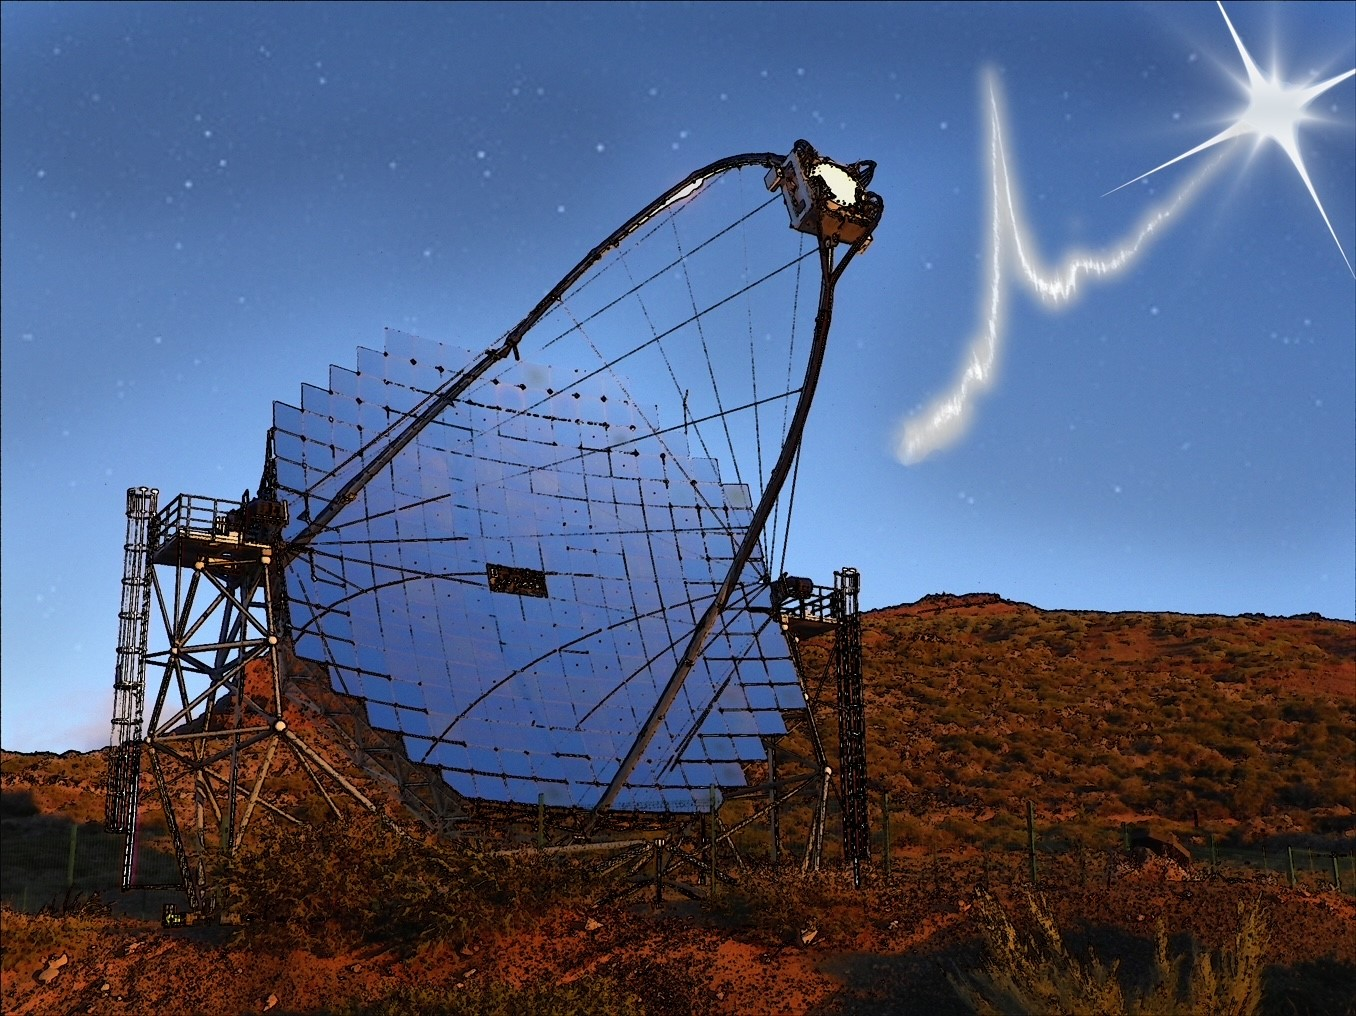 Illustration by Benito Marcote, presented during his conference talk, depicting one of the MAGIC telescopes and the signal from a Fast Radio Burst detected during the observations.